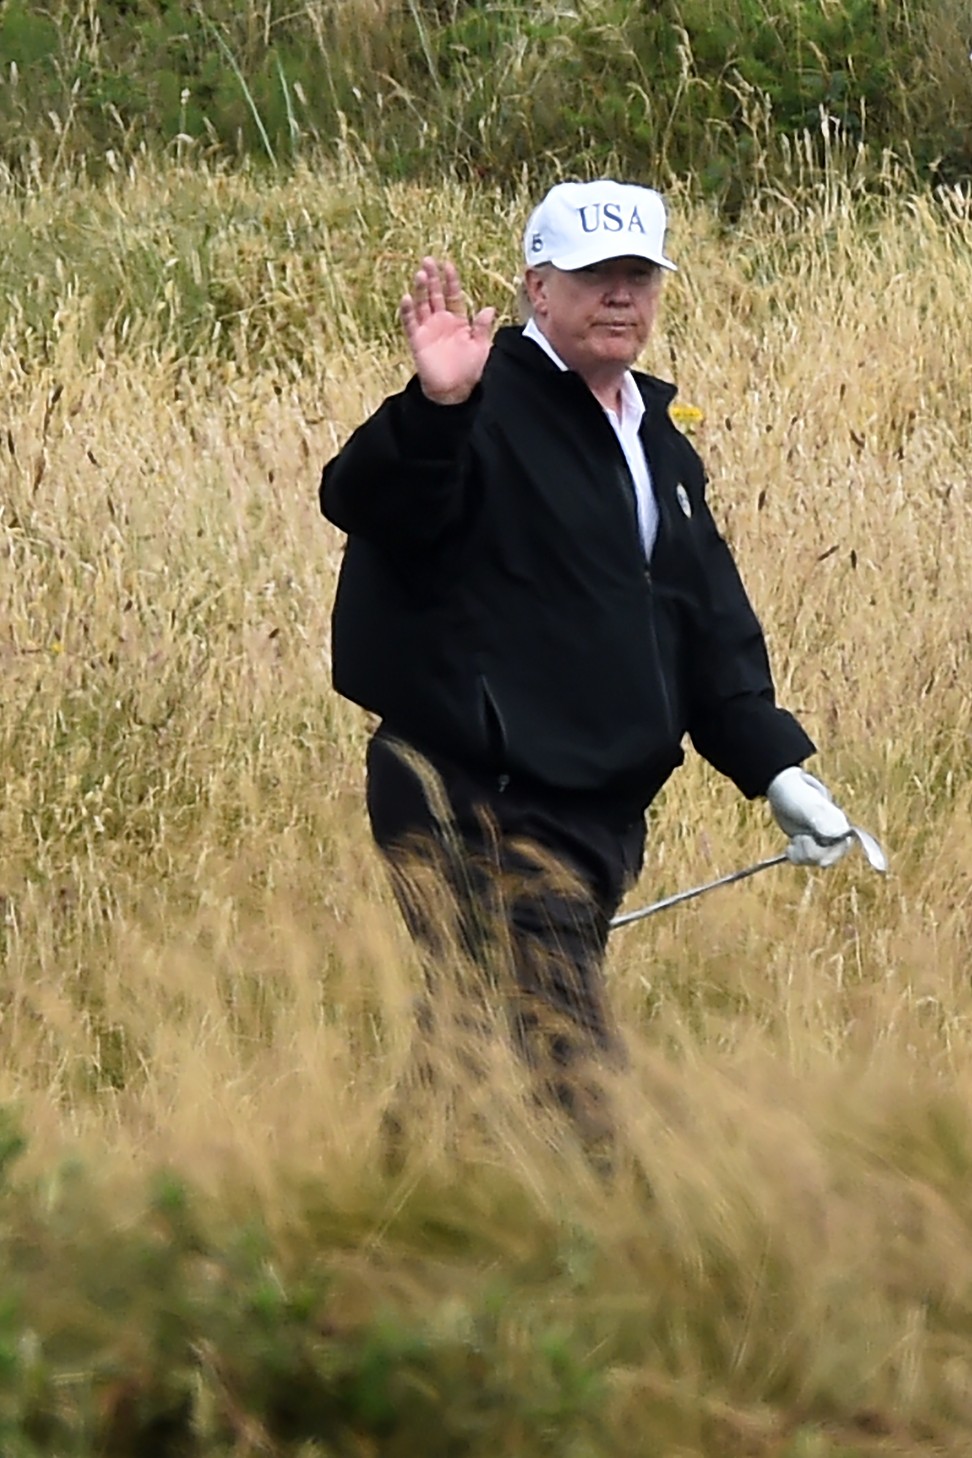 US President Donald Trump during a round of golf in Turnberry, Scotland in 2018. File photo: AFP